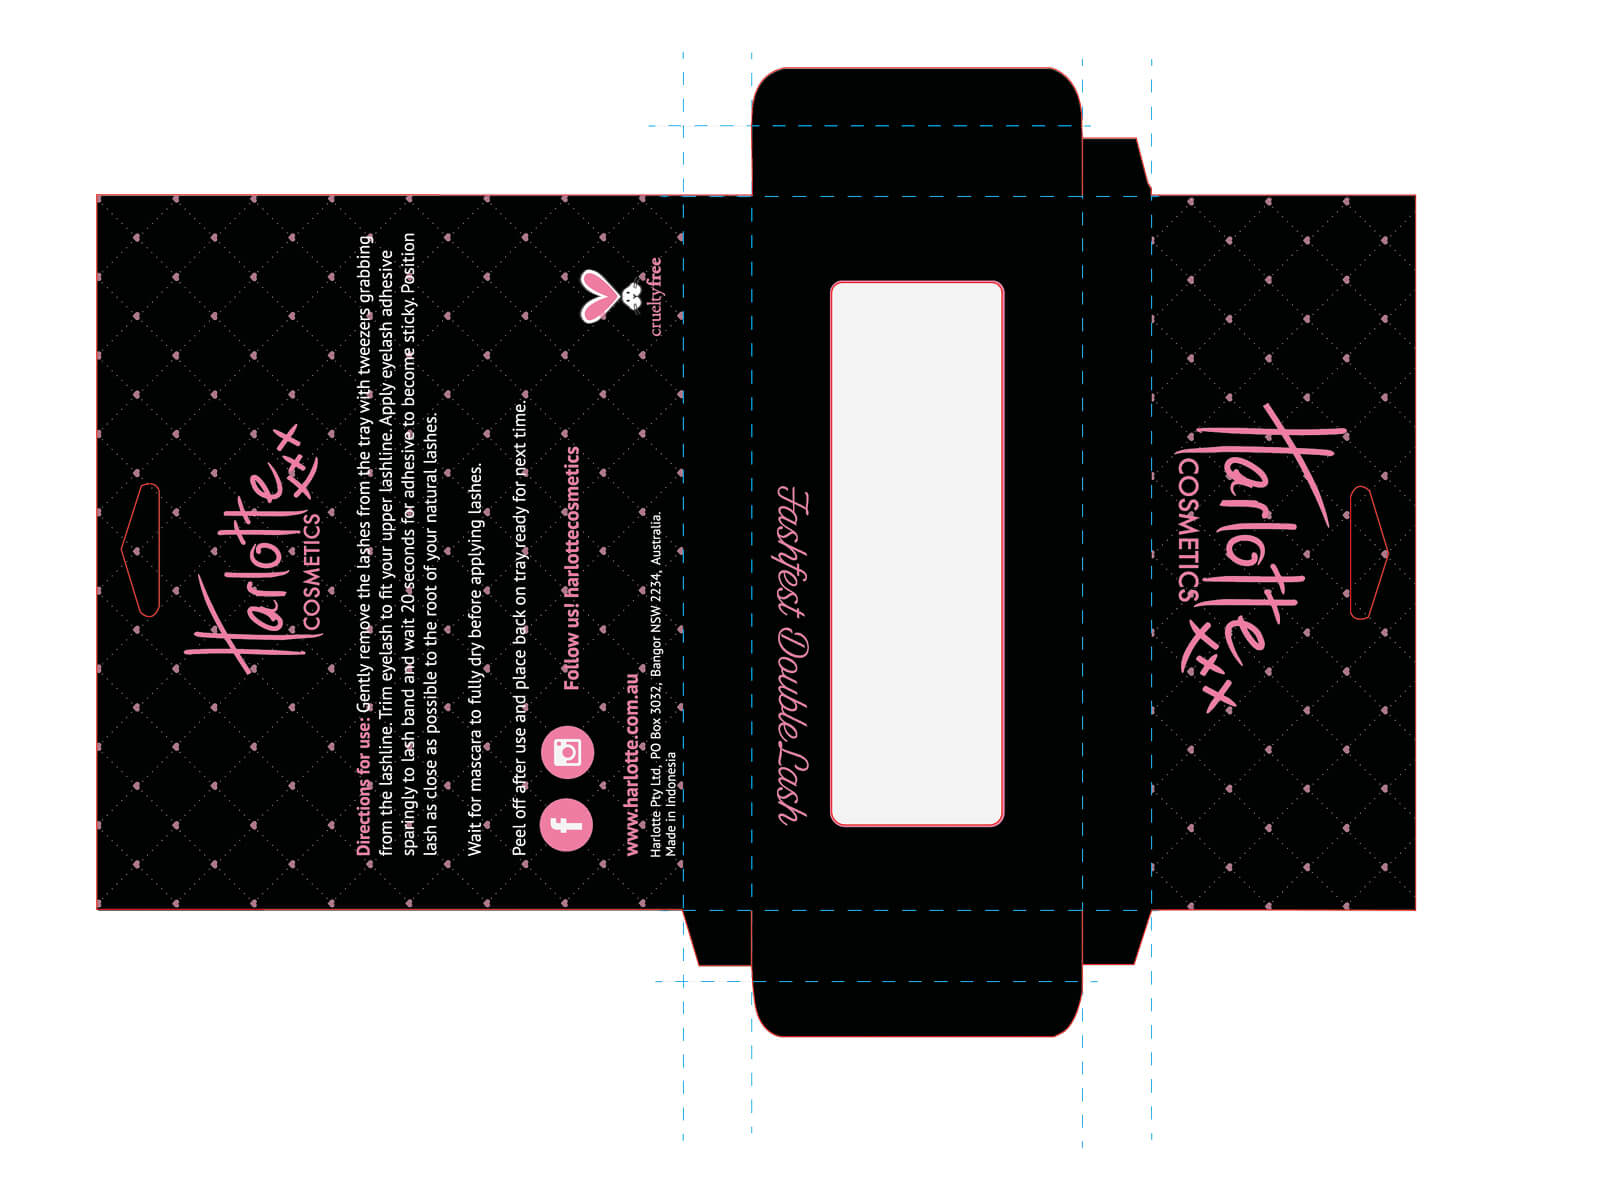 packaging design, dieline, custom product packaging, box design, branding, professional graphic design for cosmetic makeup company harlotte cosmetics, best packaging designer